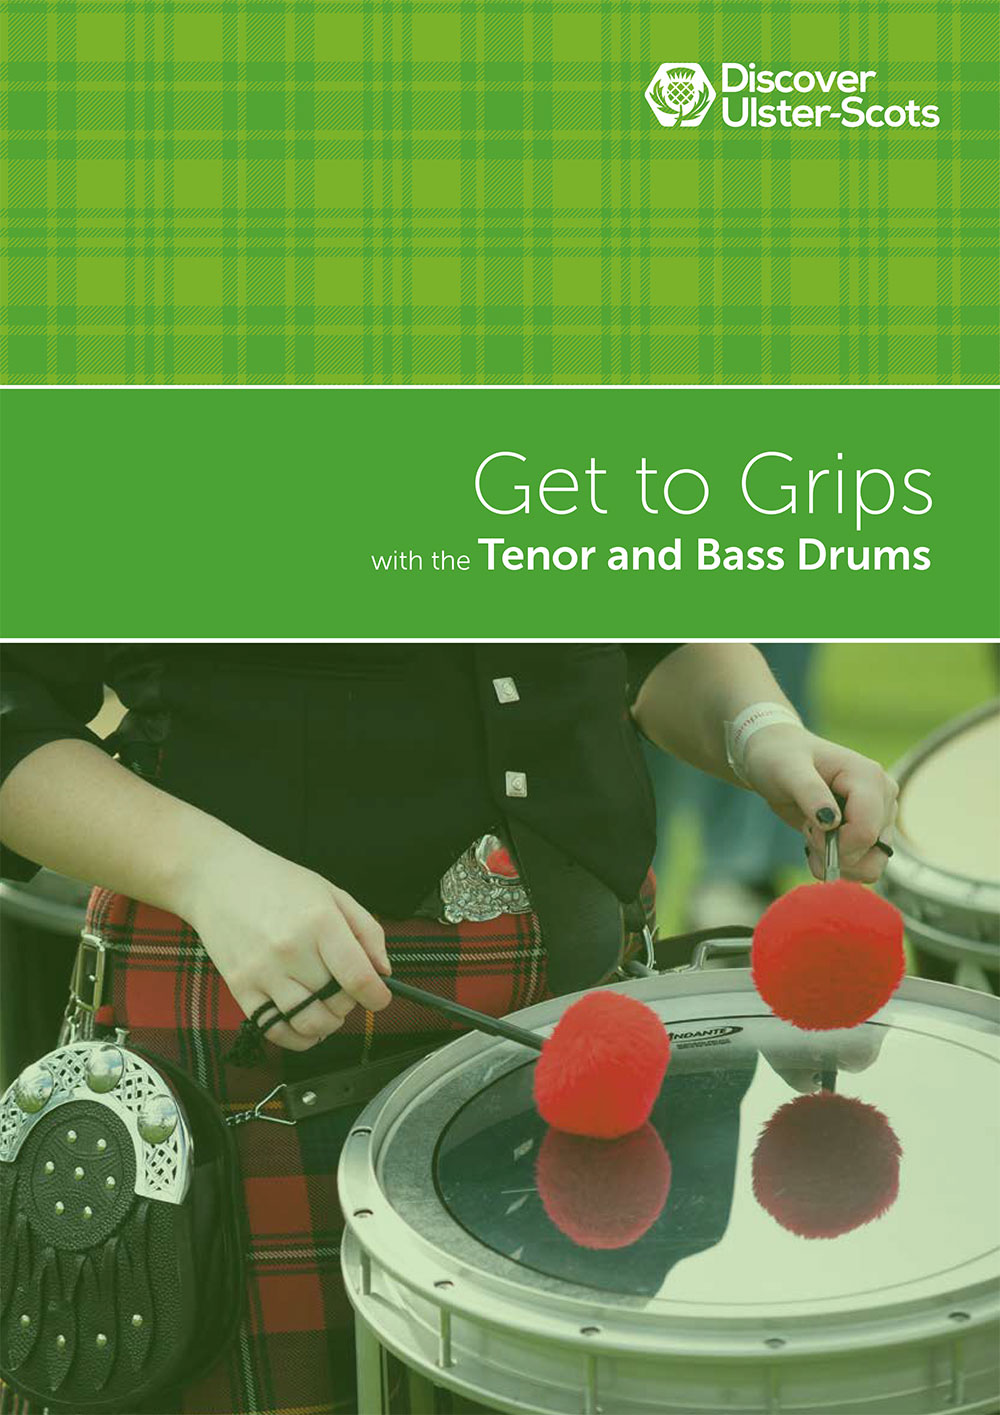 Get to Grips with the Tenor and Bass Drums